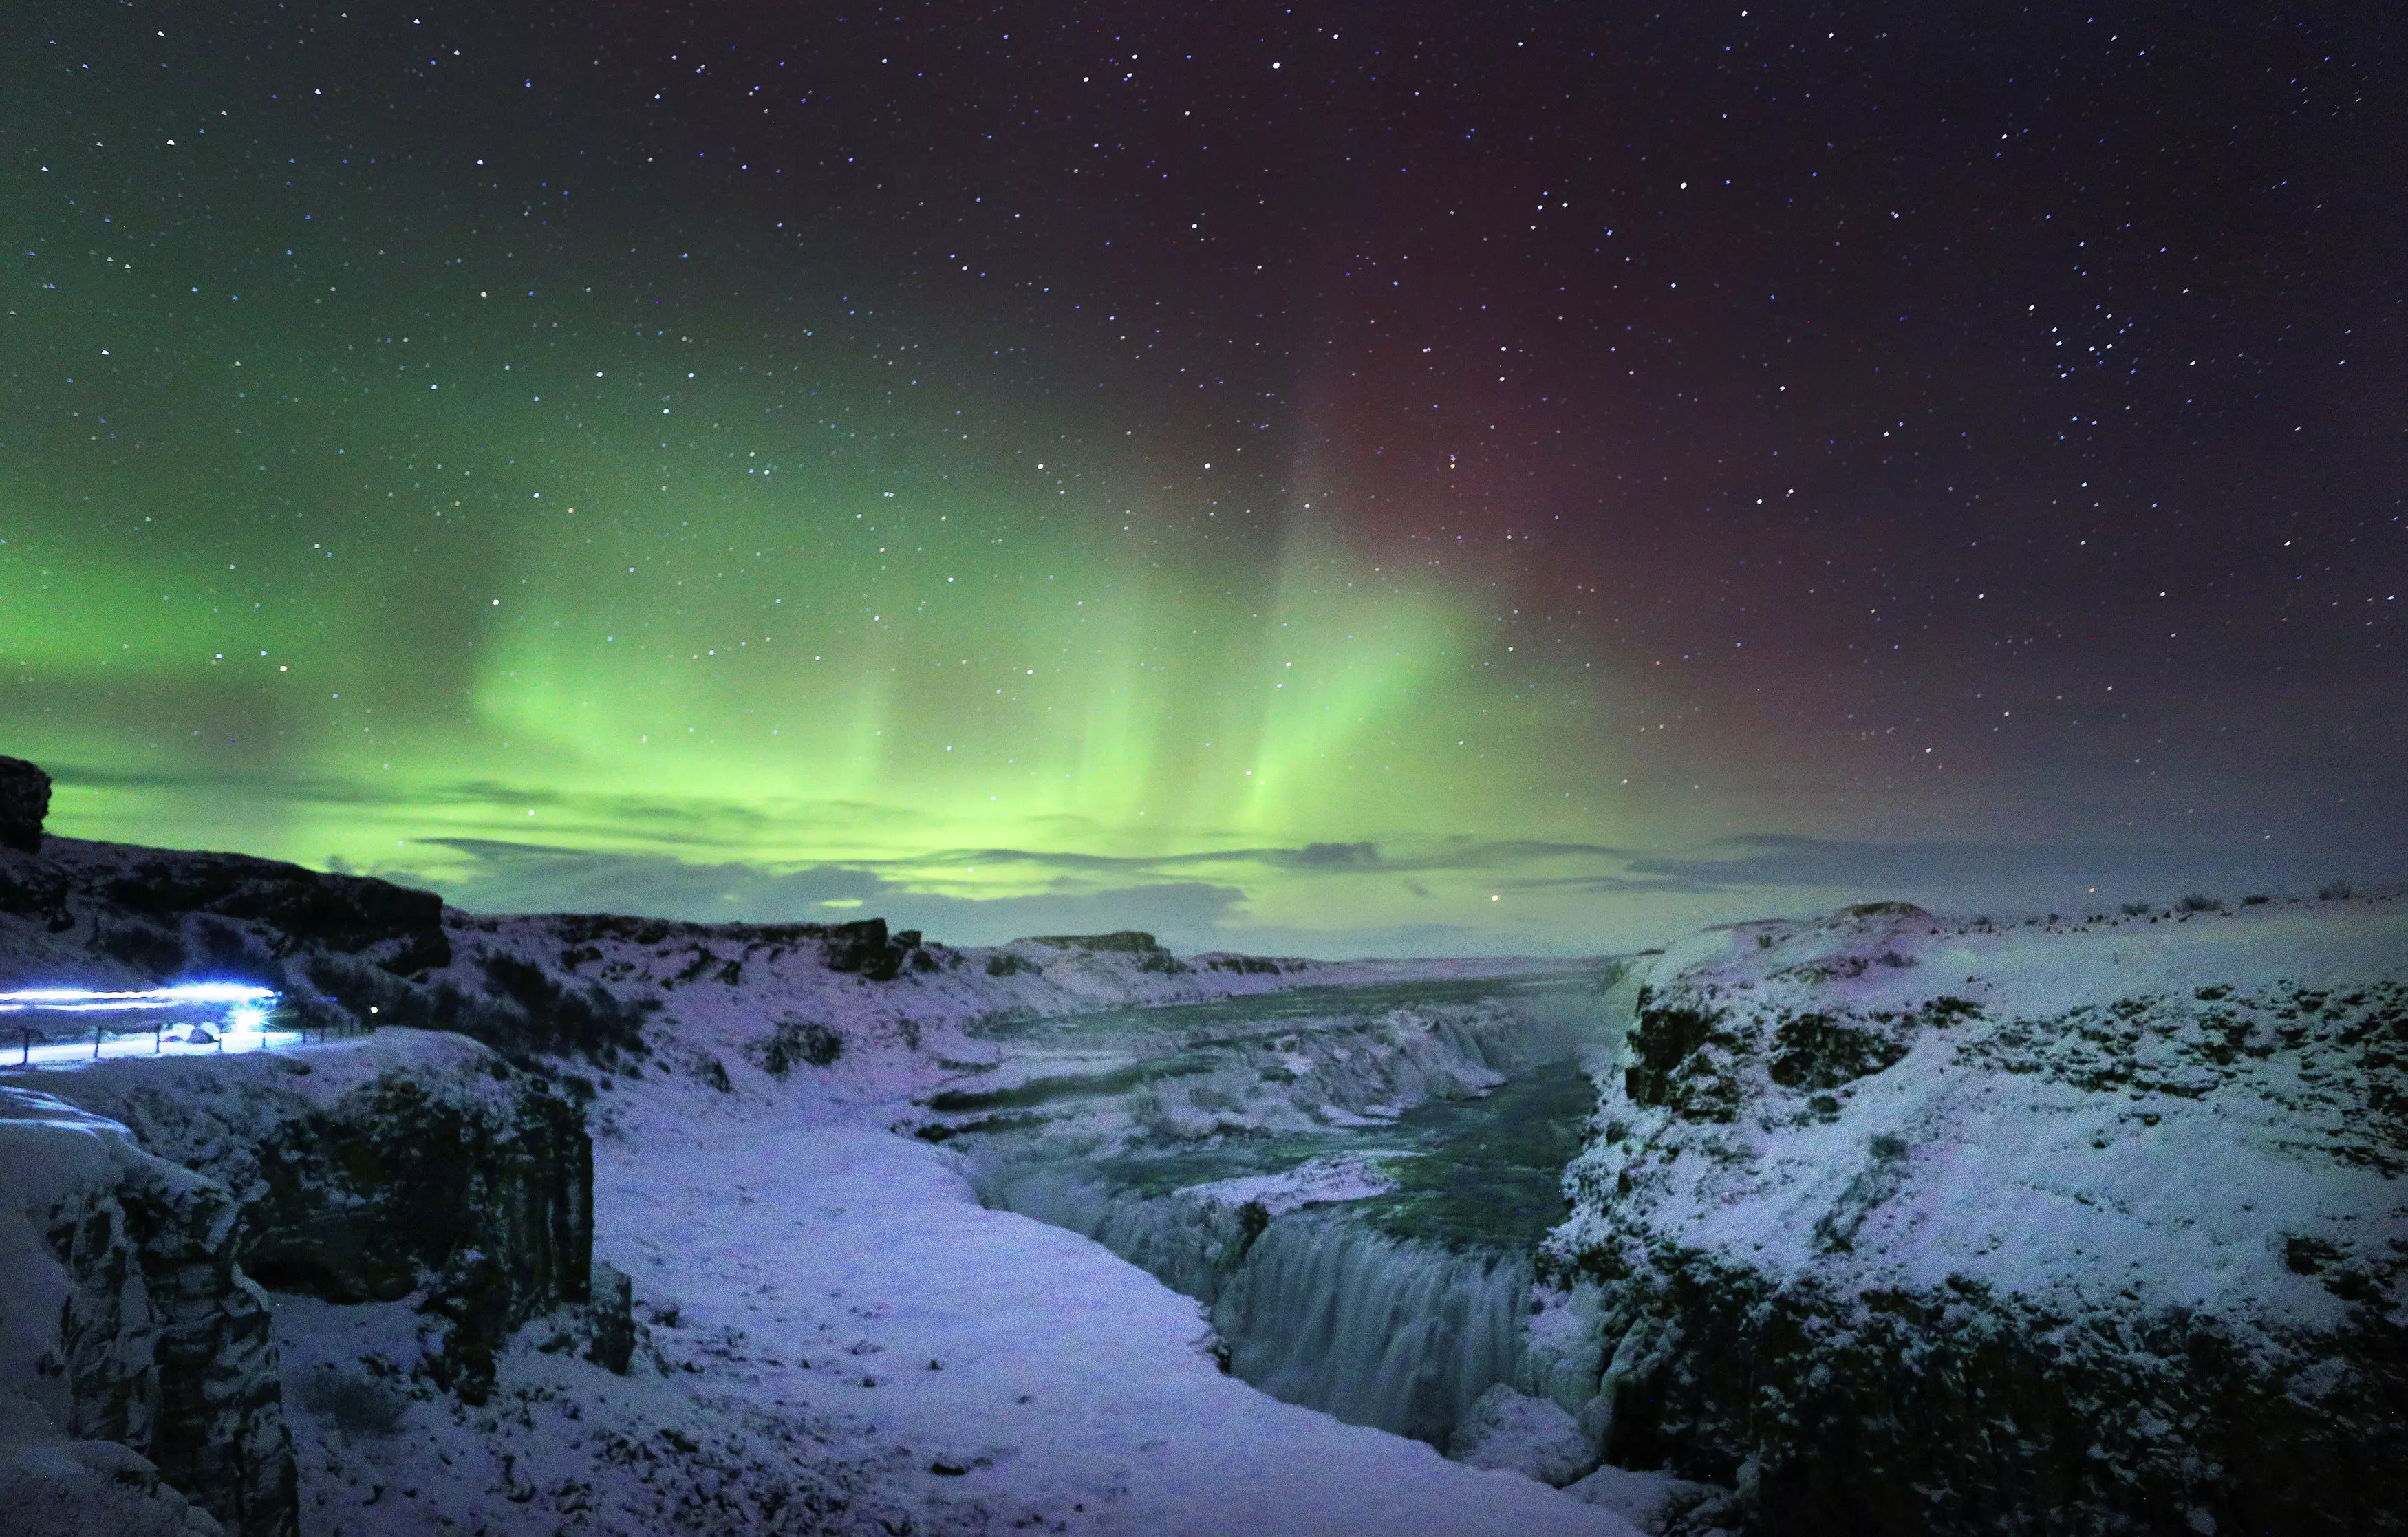 What the sky looks like in Iceland during the Northern Lights.